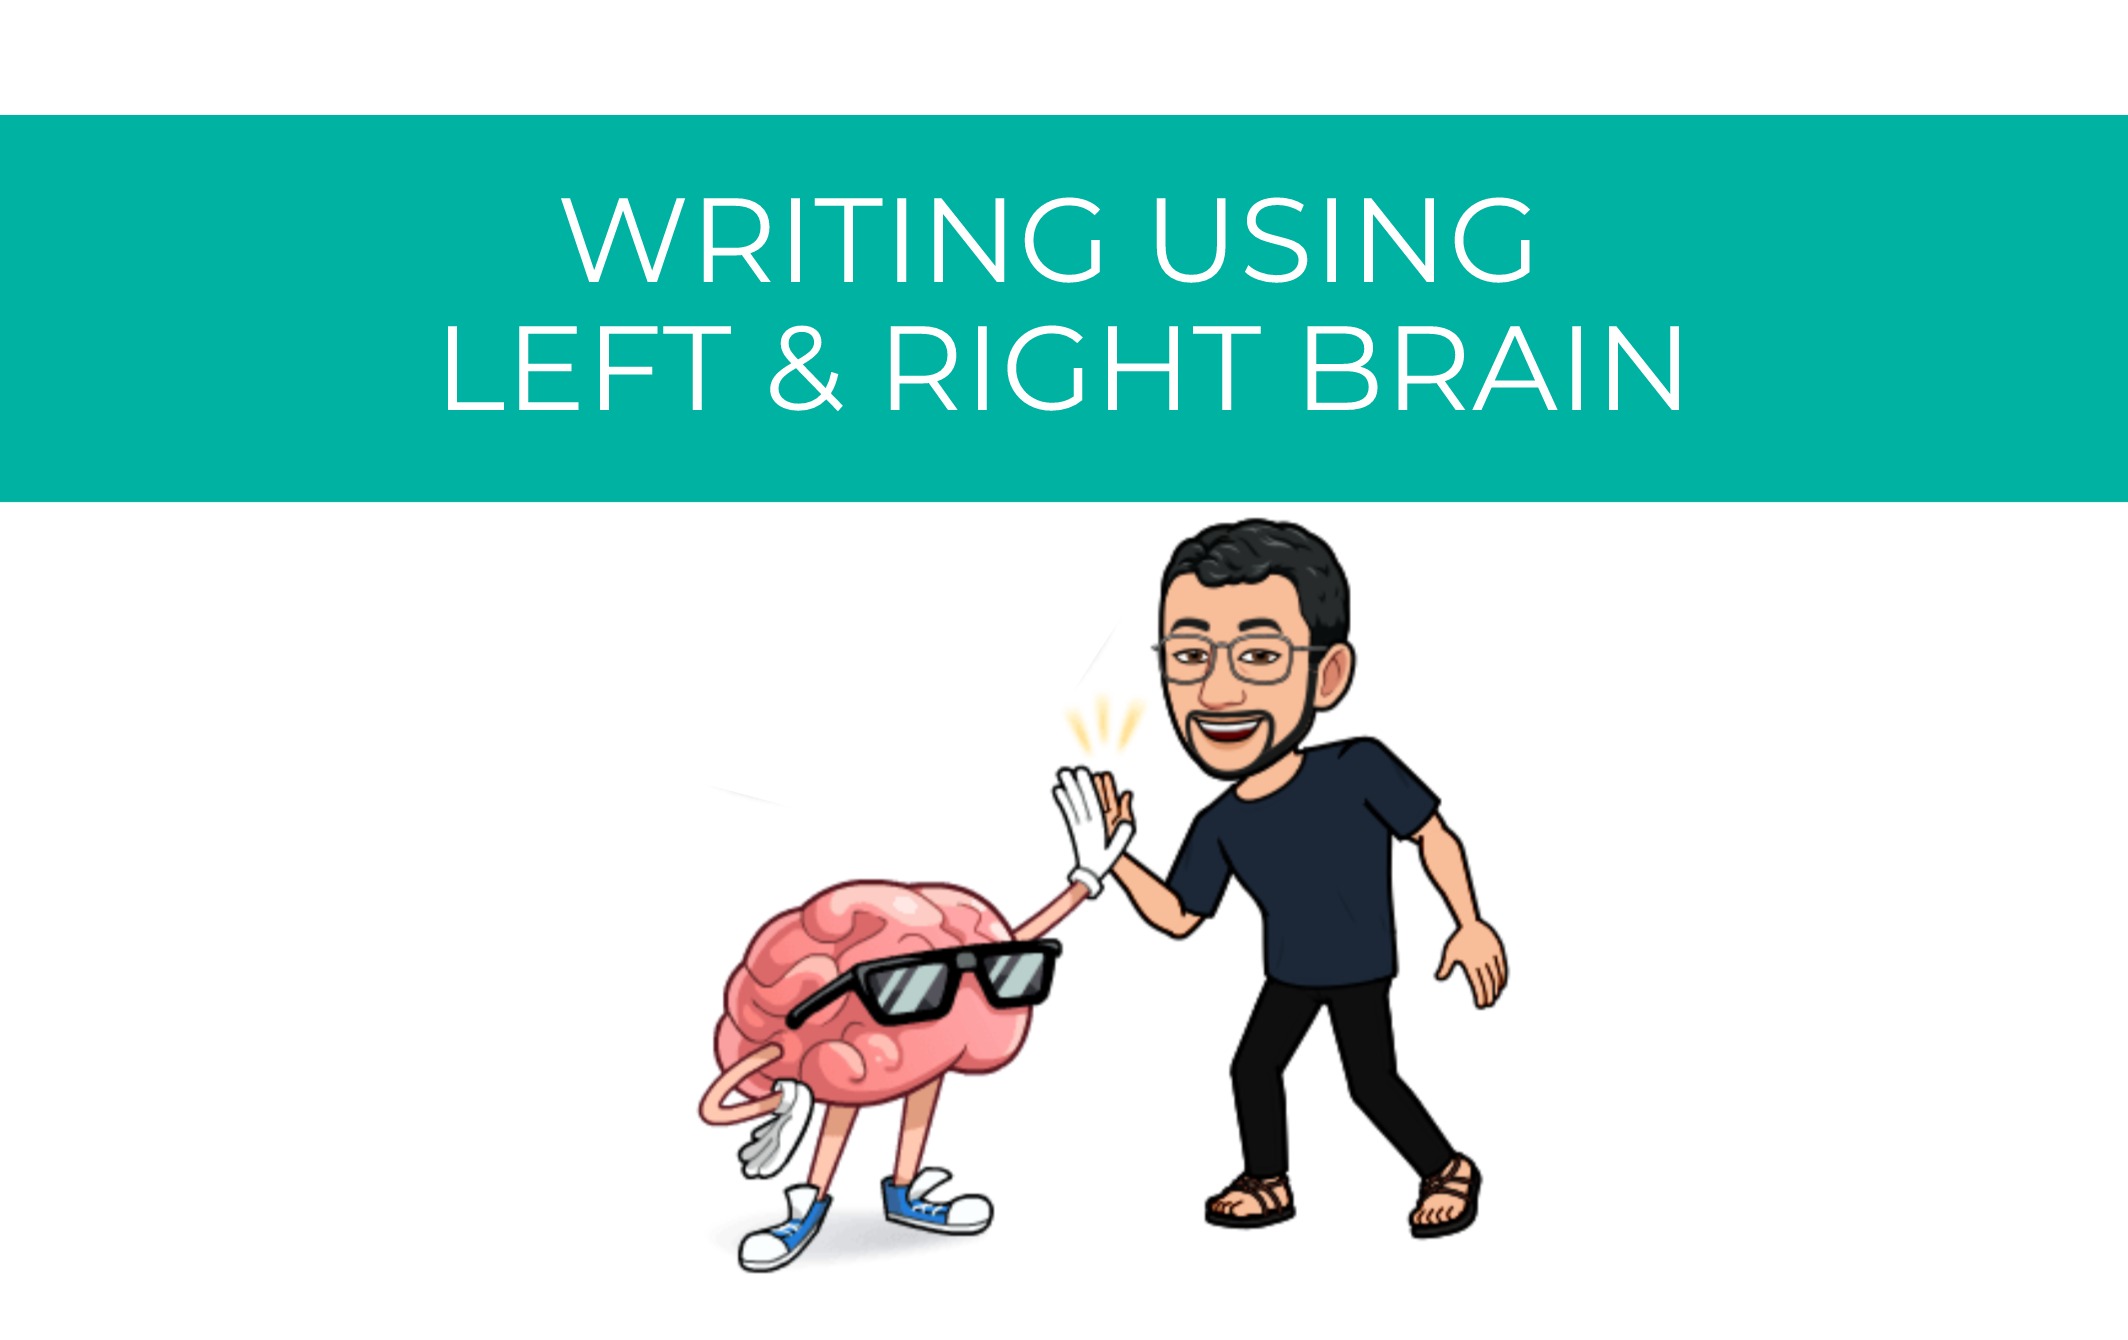 My Writing Process Using Left and Right Brain